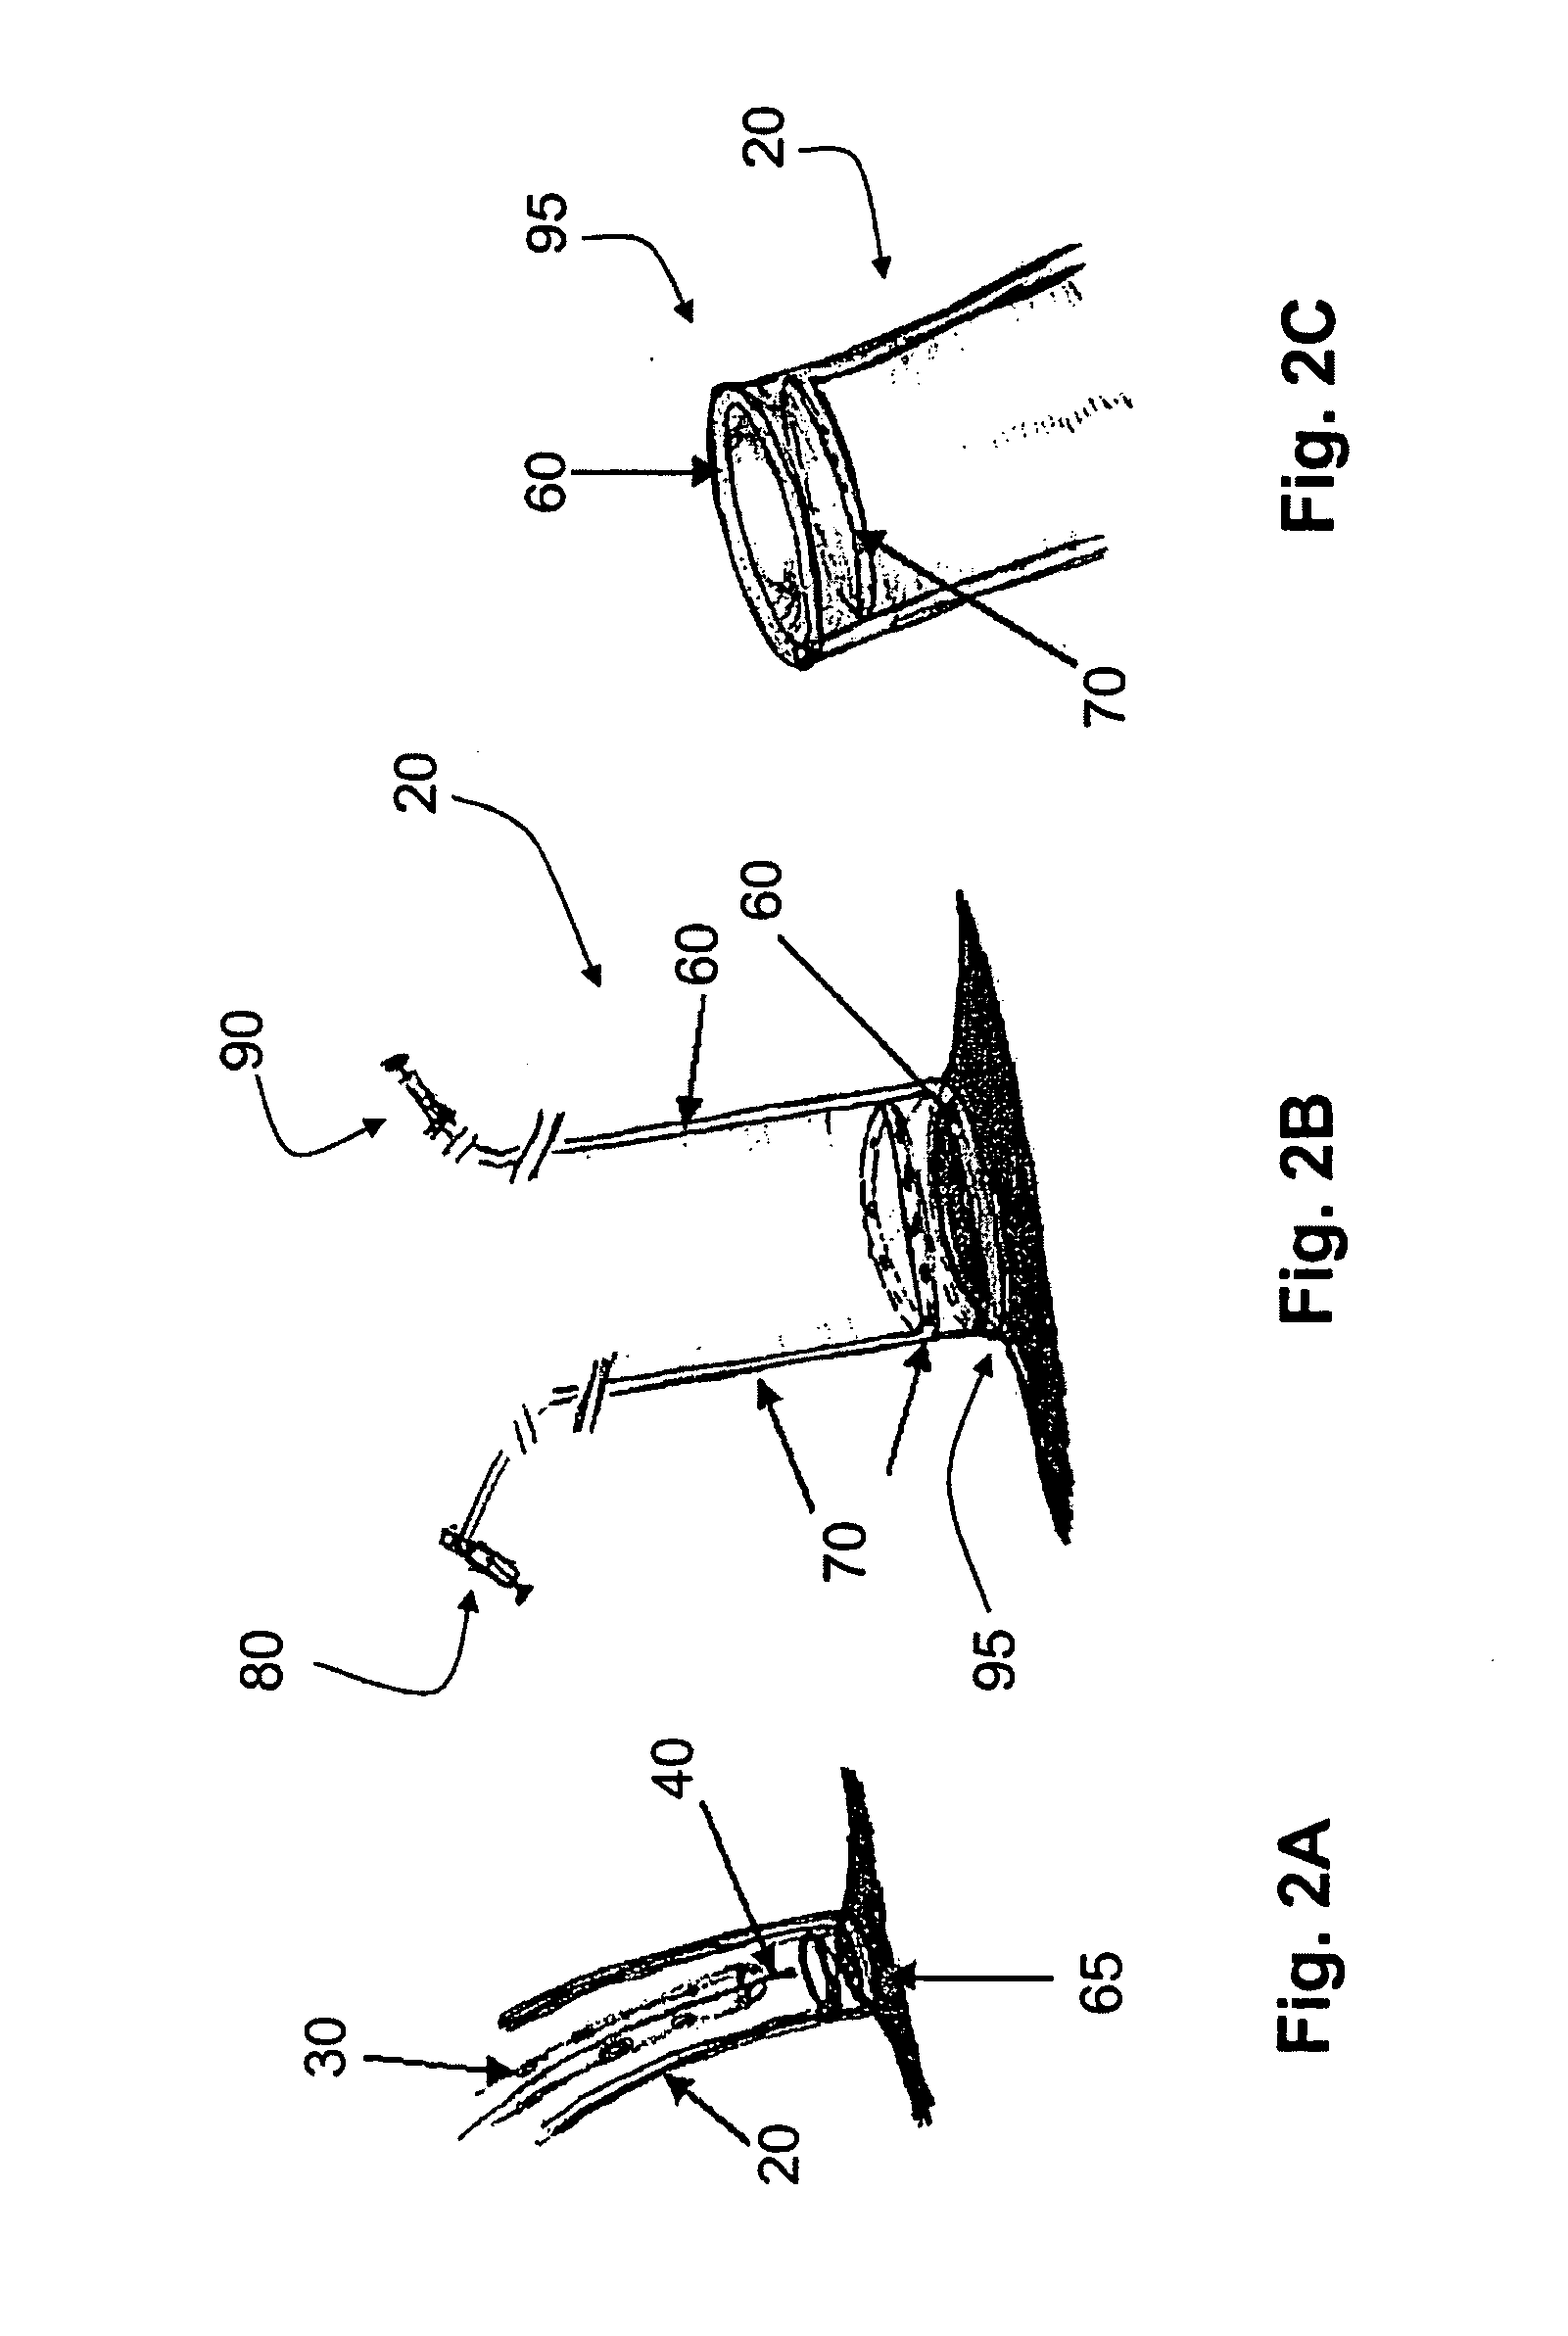 Devices, systems, and methods for pericardial access